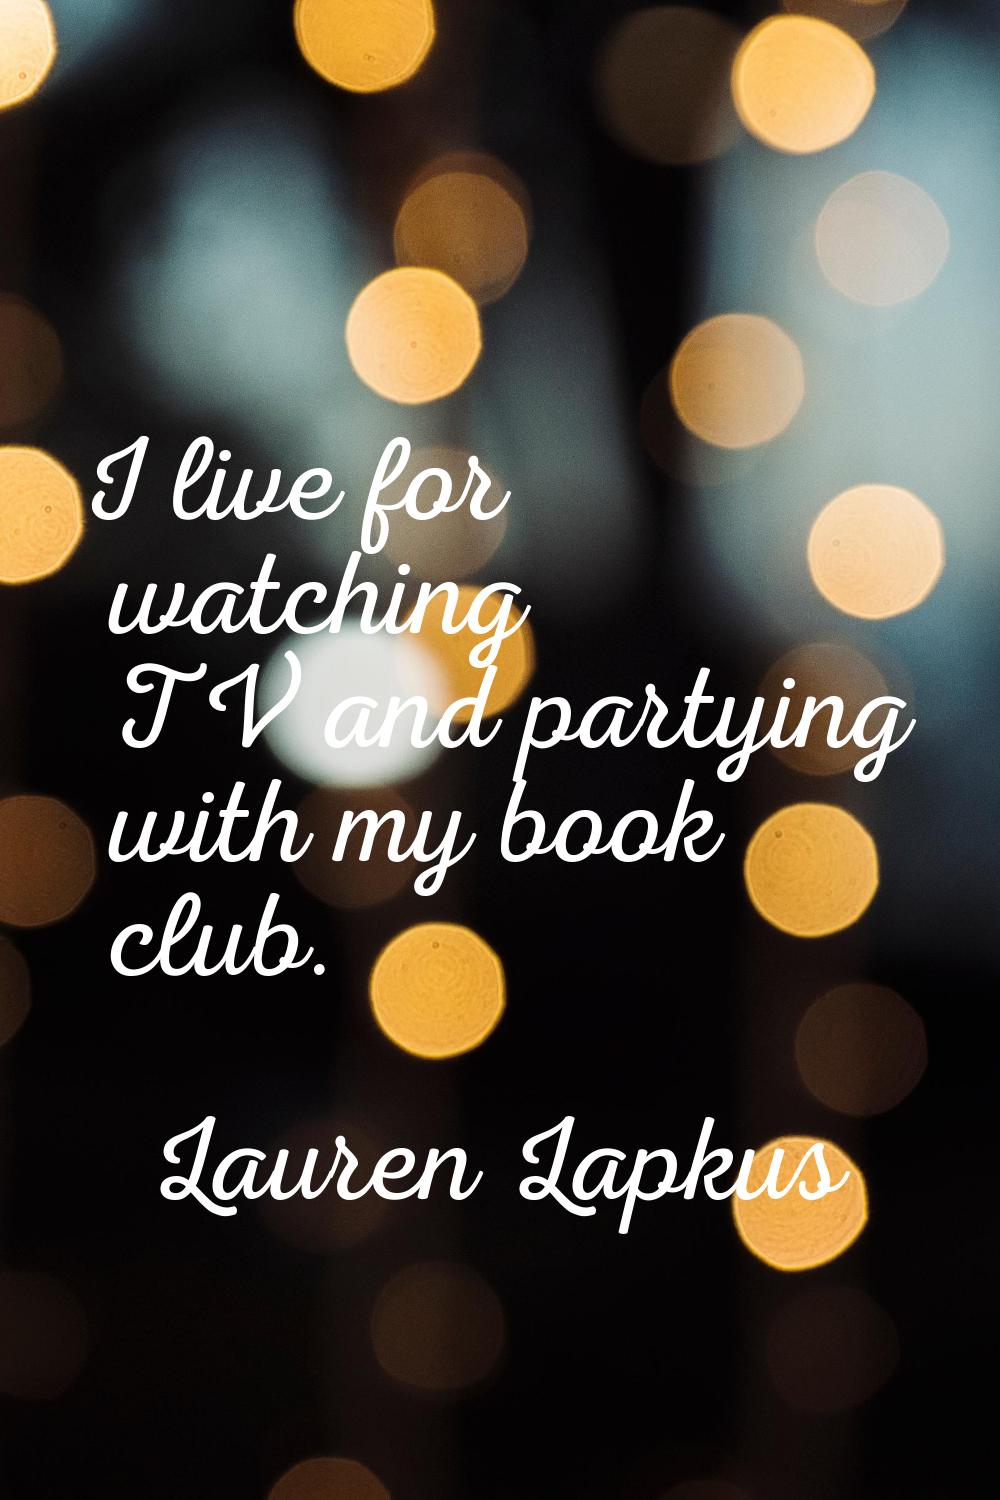 I live for watching TV and partying with my book club.